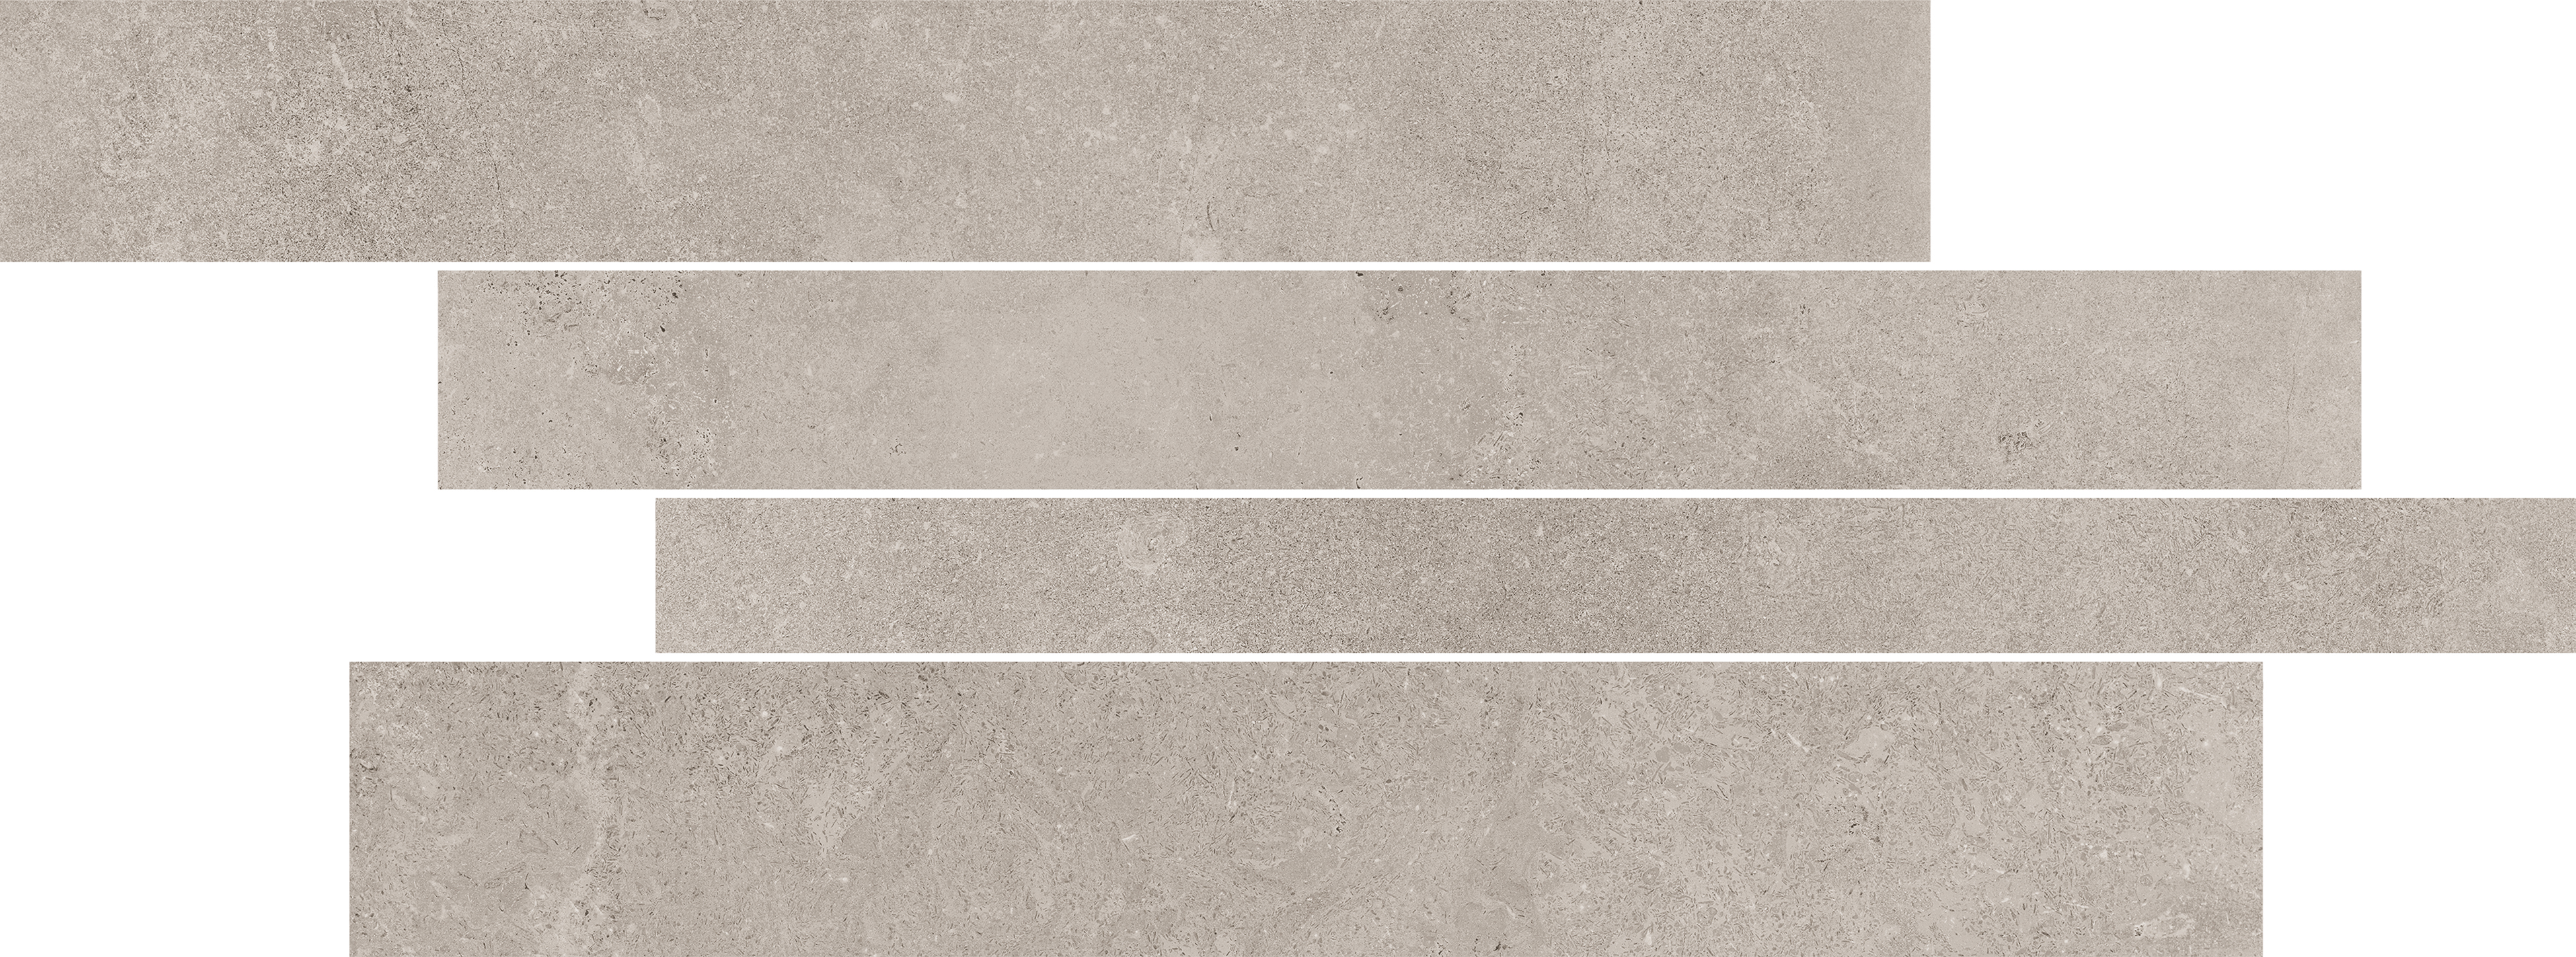 Panaria Prime Stone Silver Antibacterial - Soft Muretto PG-PMM2 30x60cm rectified 9,5mm